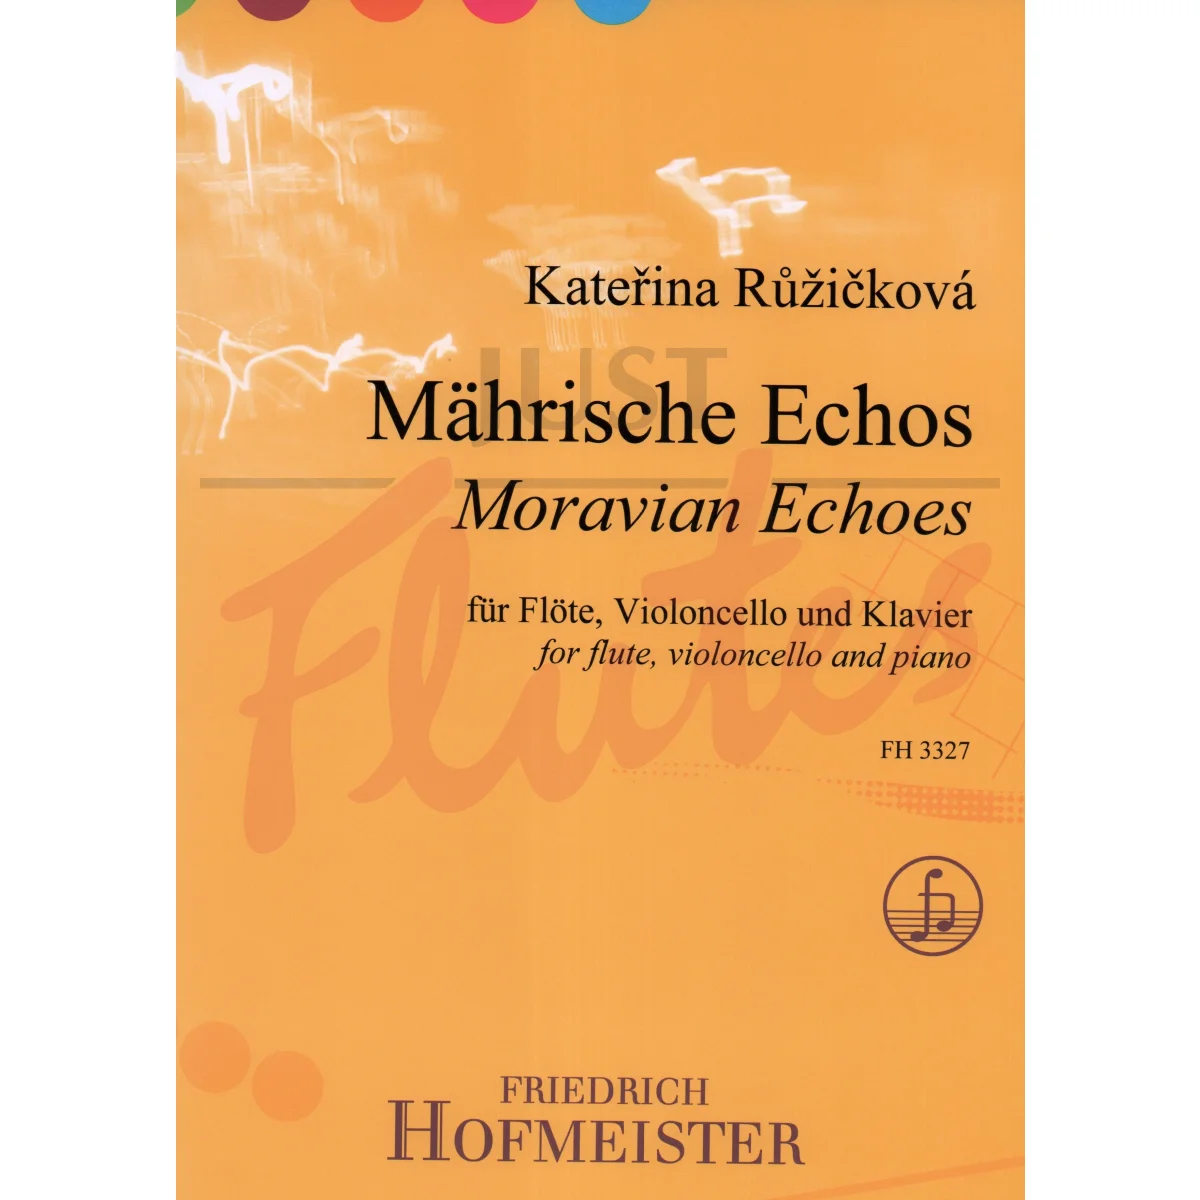 Moravian Echoes for Flute, Cello and Piano